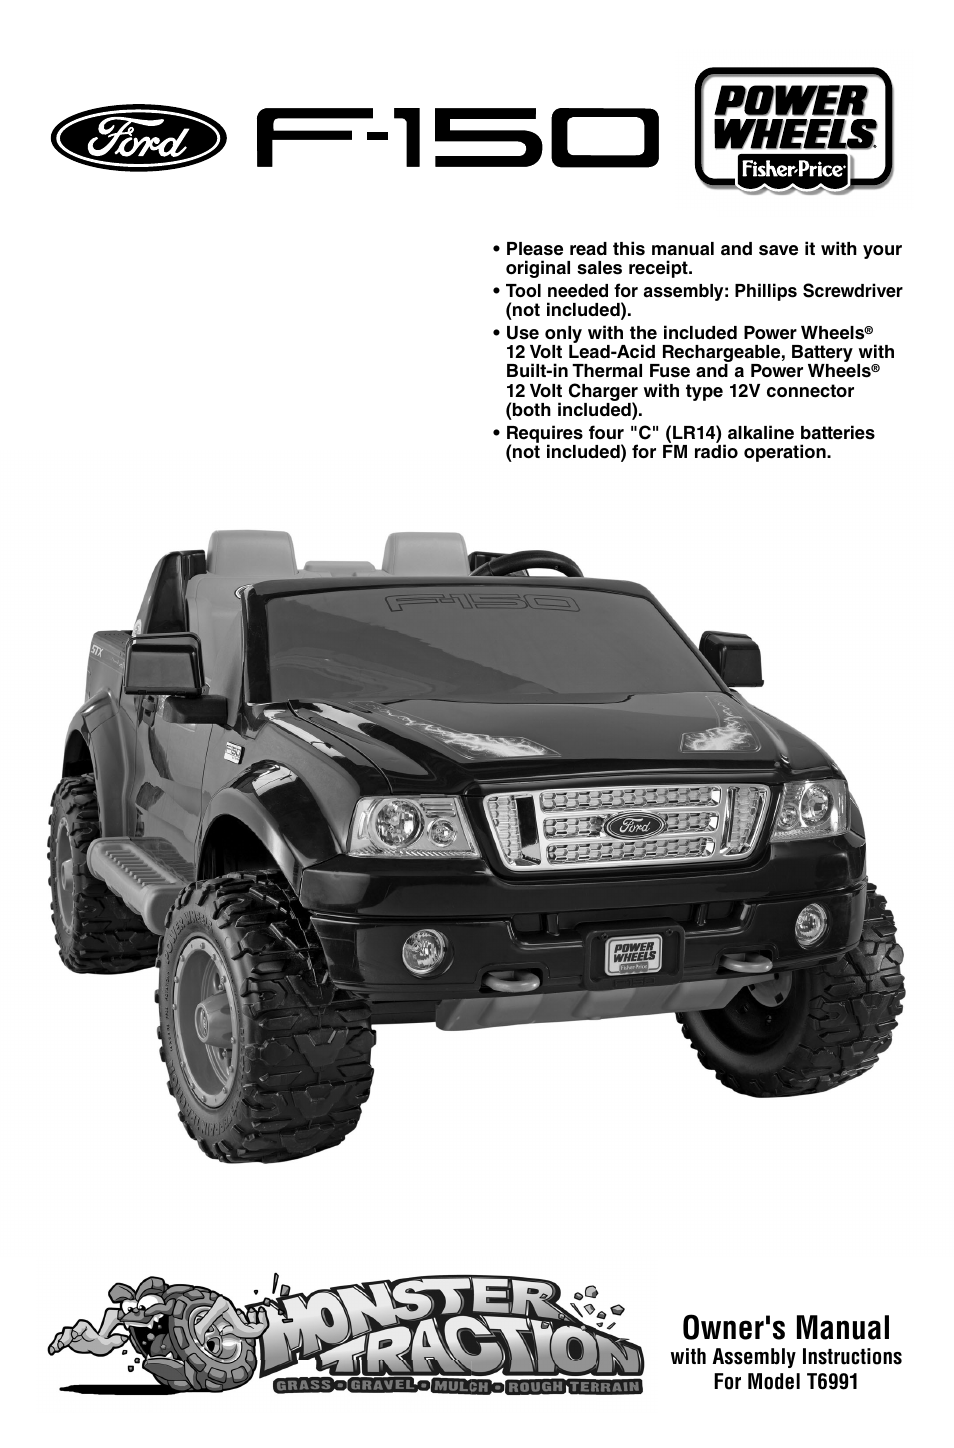 Fisher-Price Power Wheels Ford F-150 T6991 User Manual | 28 pages